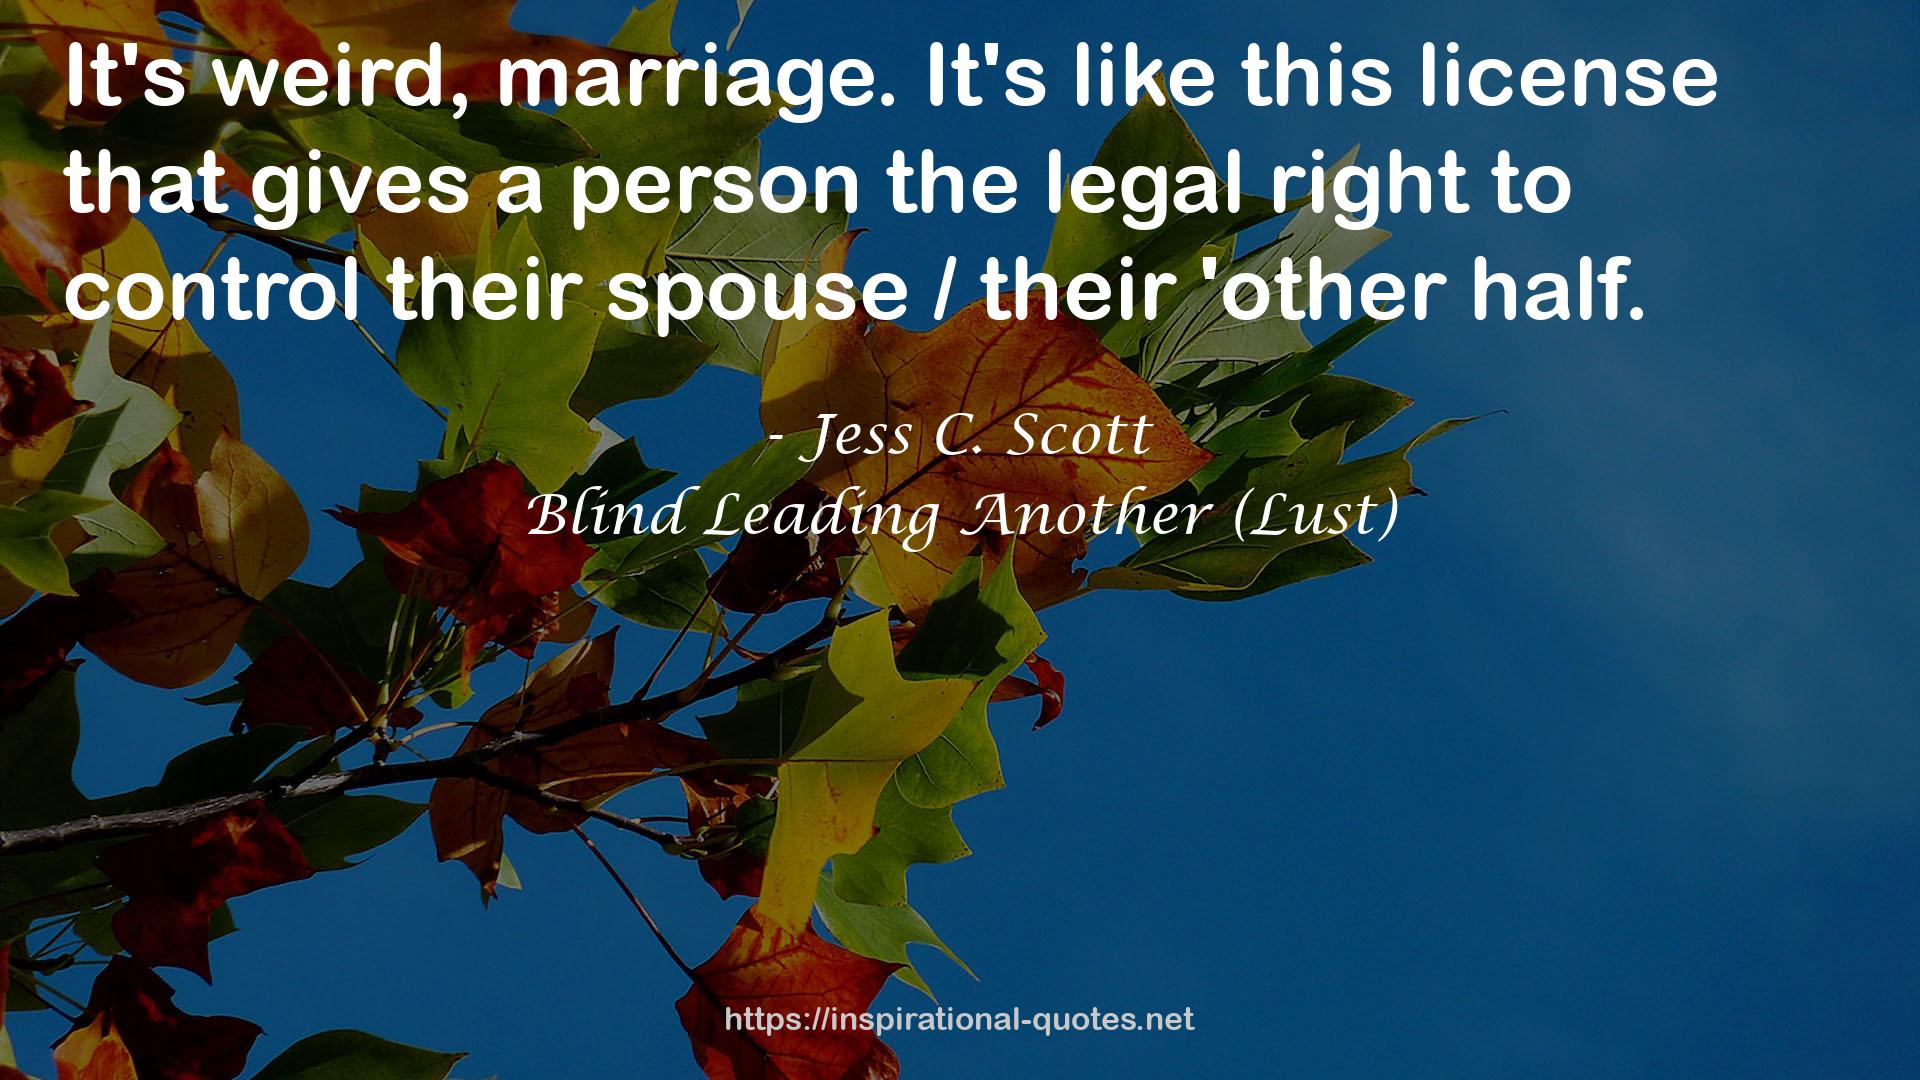 the legal right  QUOTES